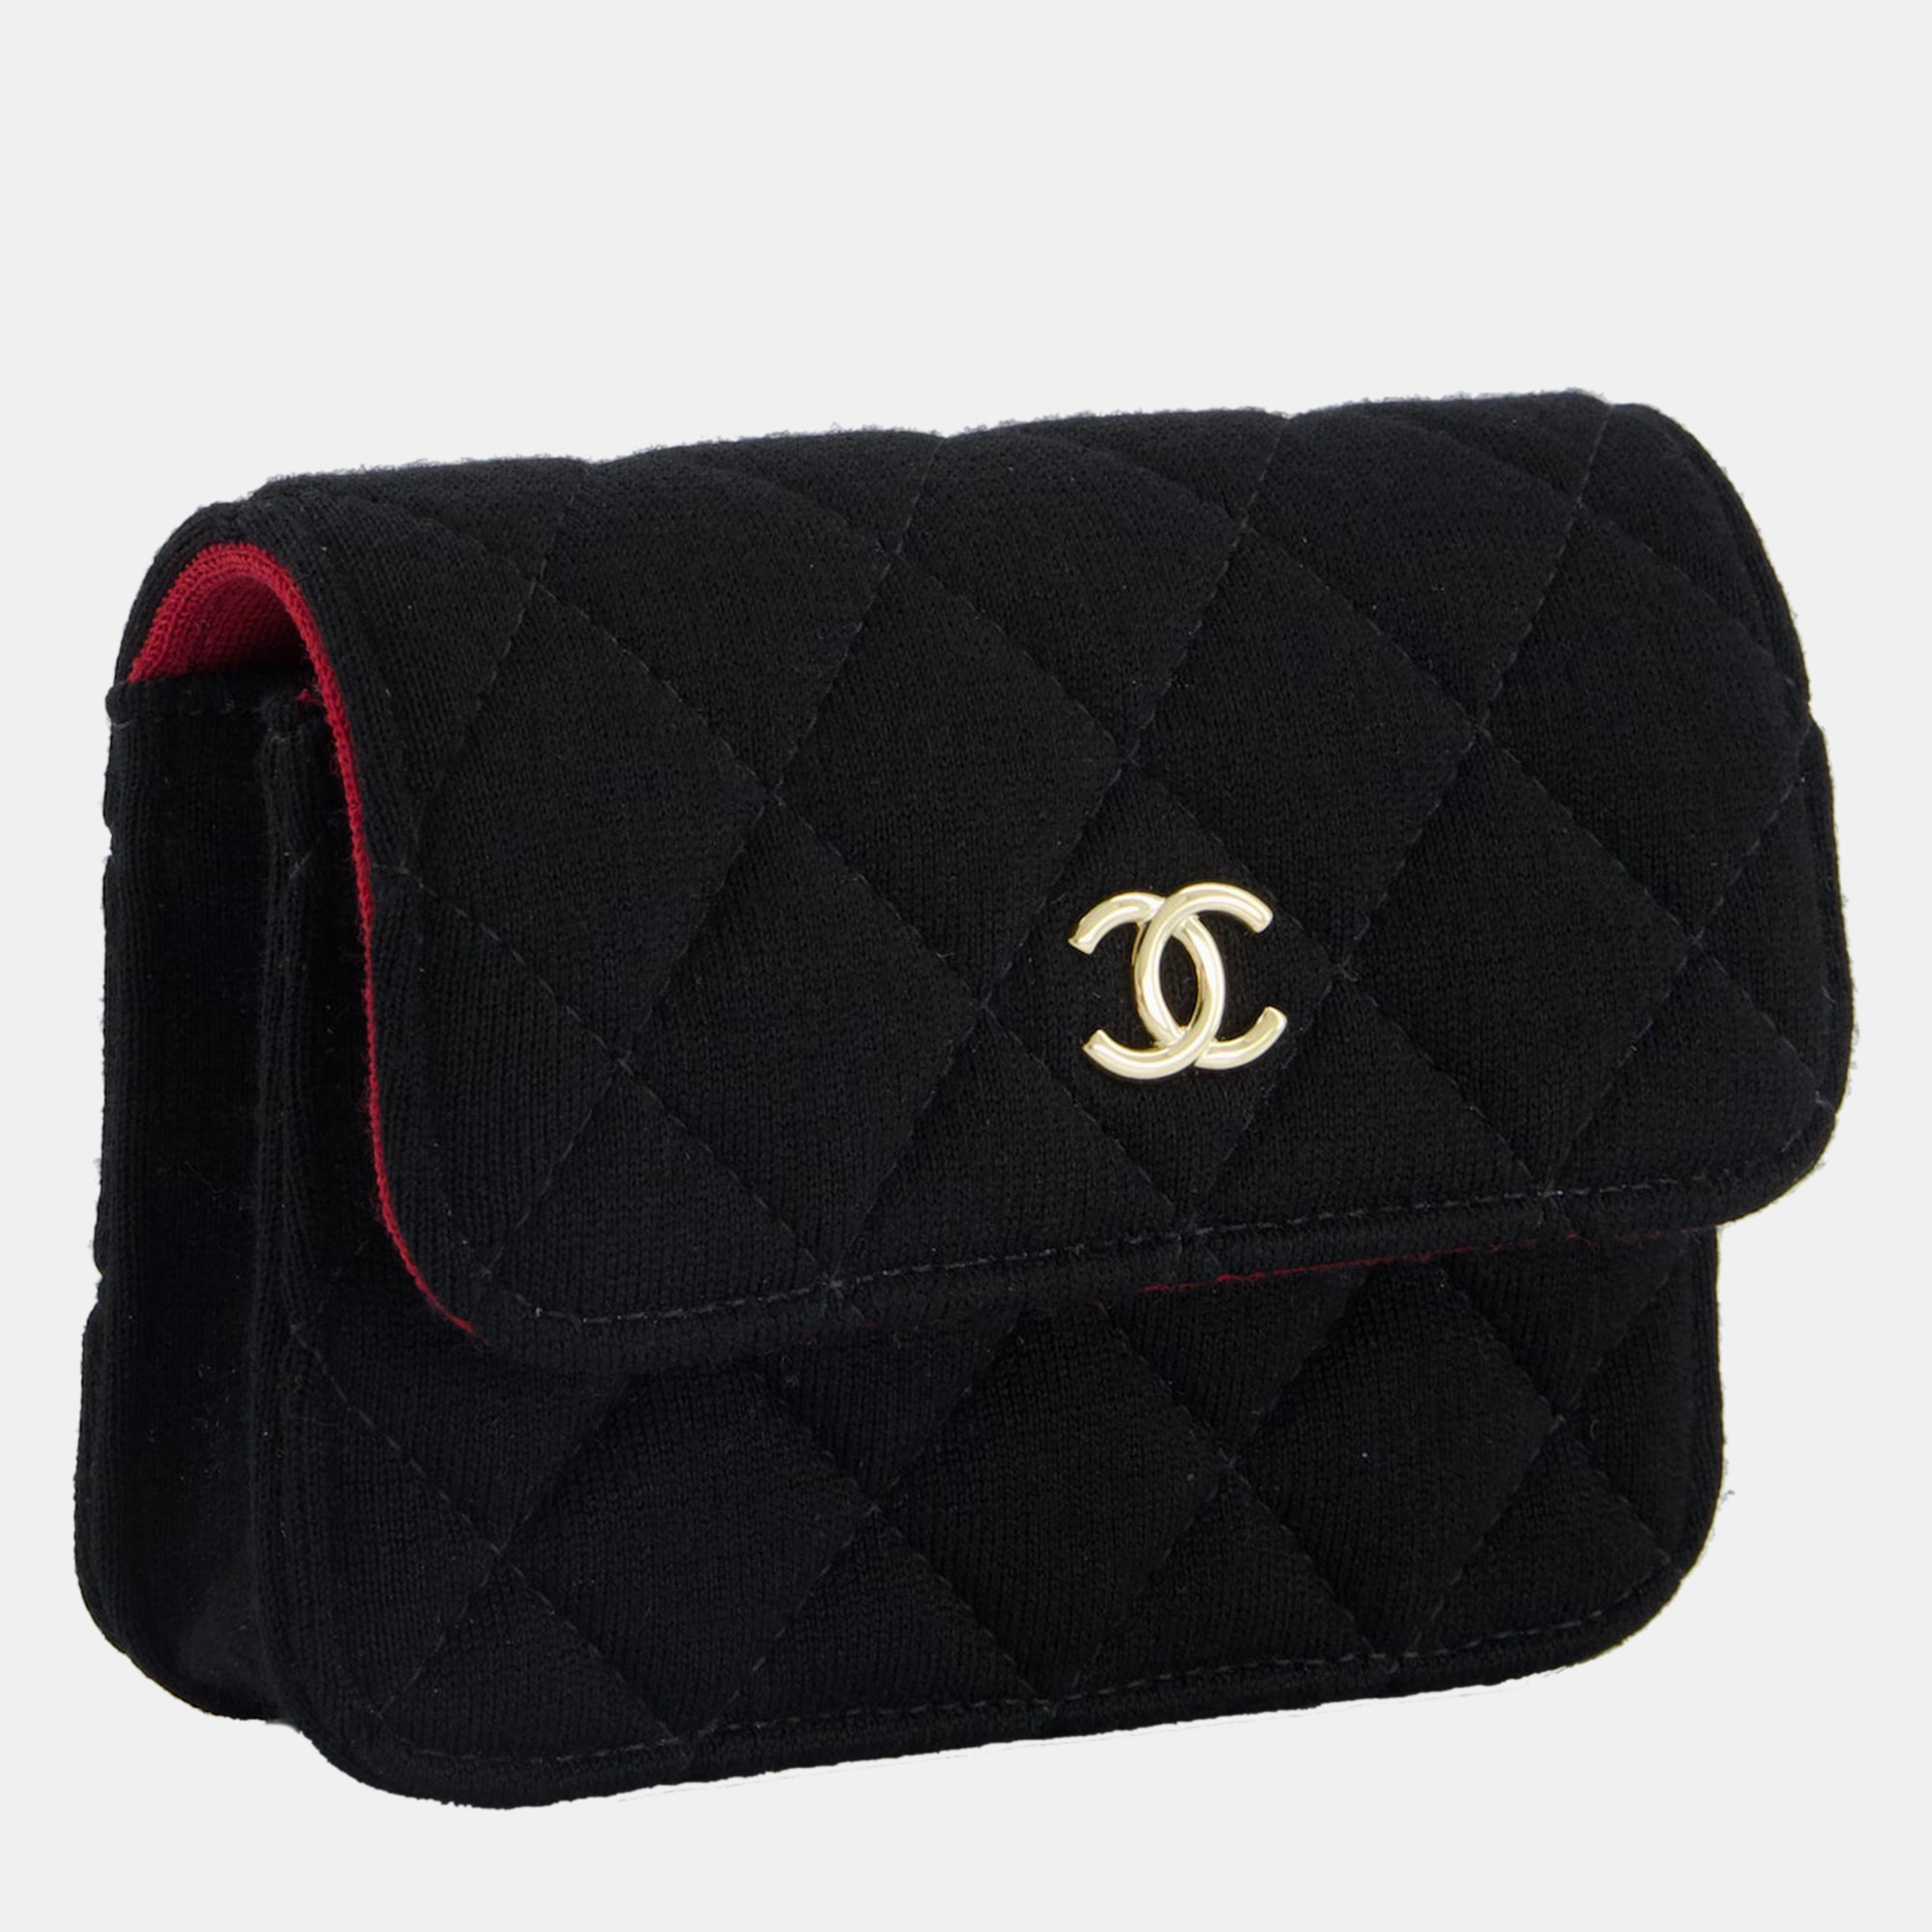 Chanel Ultra Mini Black Jersey Fabric Cross-Body Bag With Champagne Gold Hardware